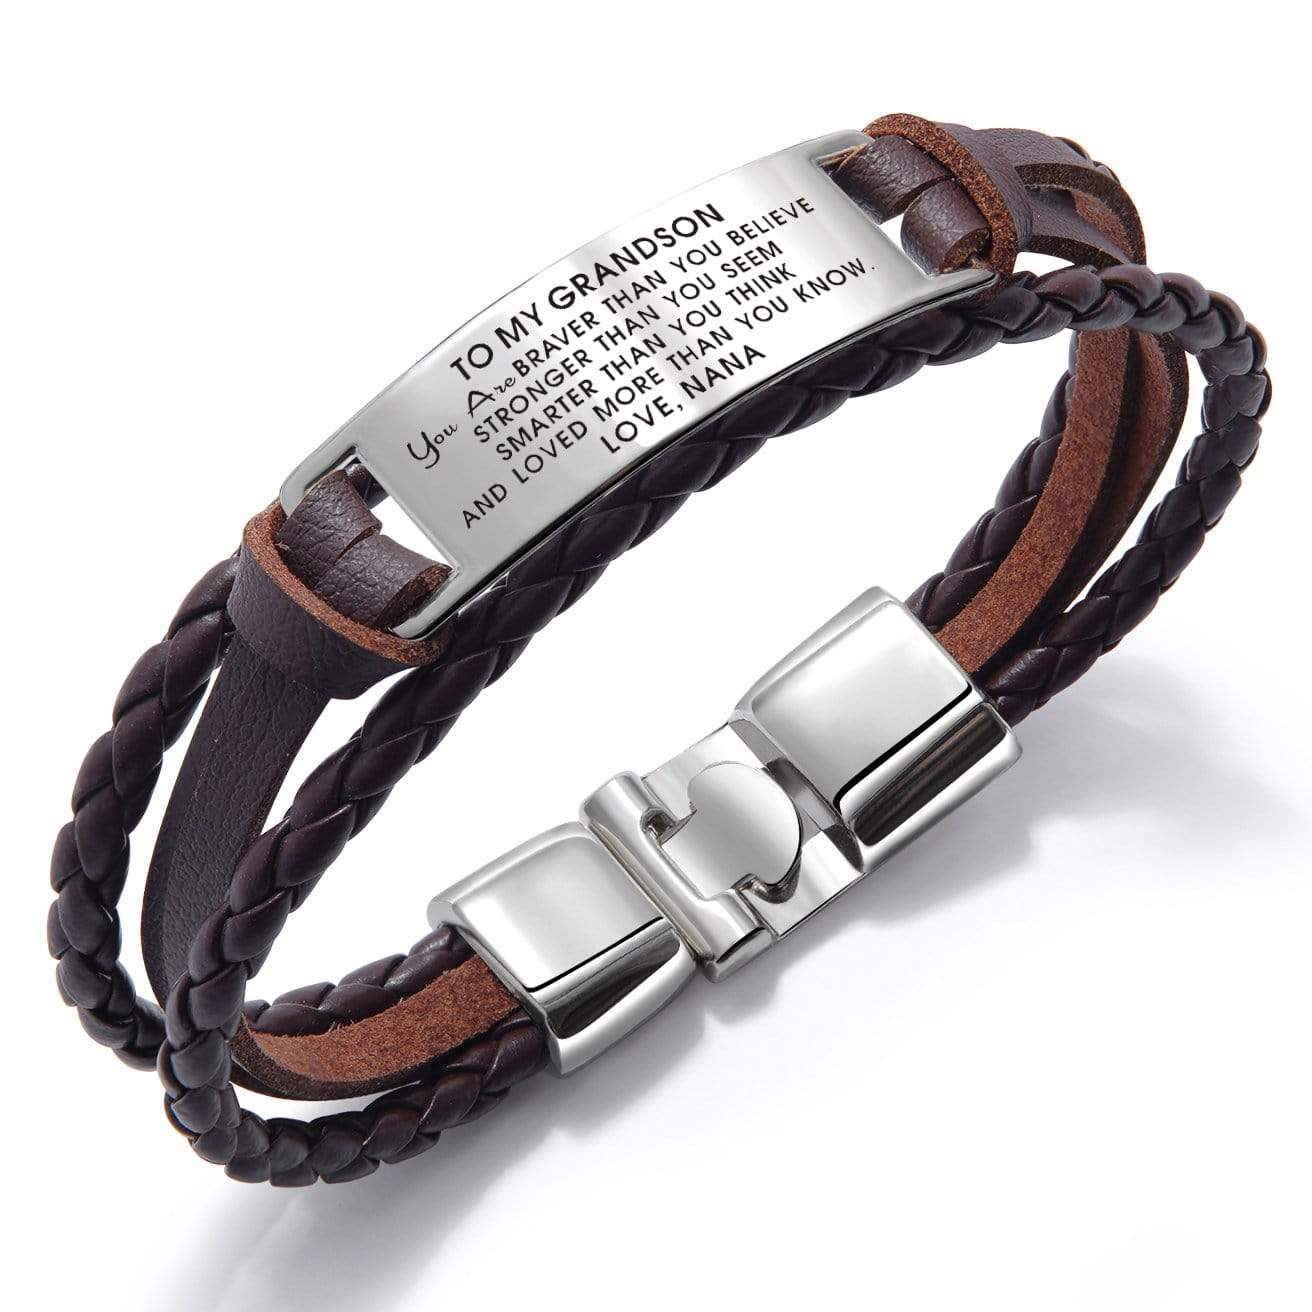 Bracelets Nana To Grandson - You Are Loved More Than You Know Leather Bracelet Brown GiveMe-Gifts